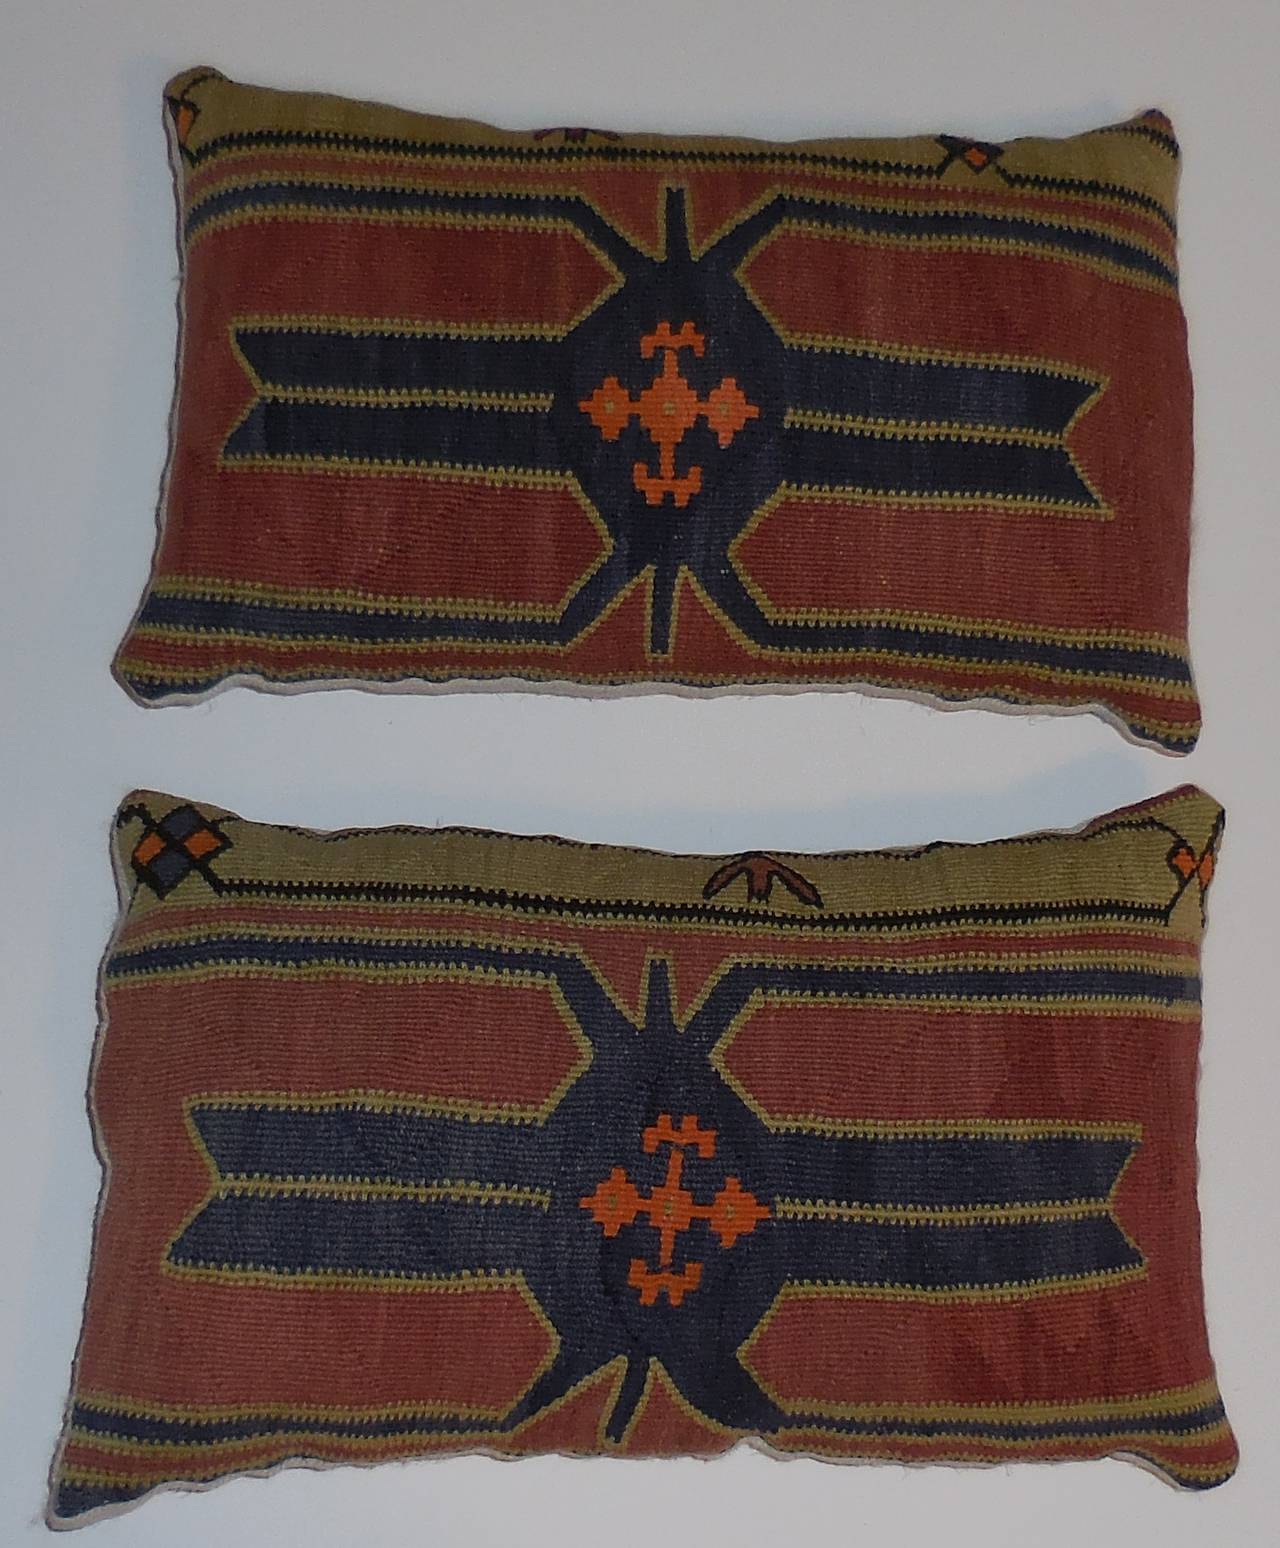 Beautiful pair of pillows, made of hand woven flat-weave Kazak rug. Geometric
Motif with yellow, orange and blue-gray colors on salmon color background.
New inserts.

Size:
1. 12